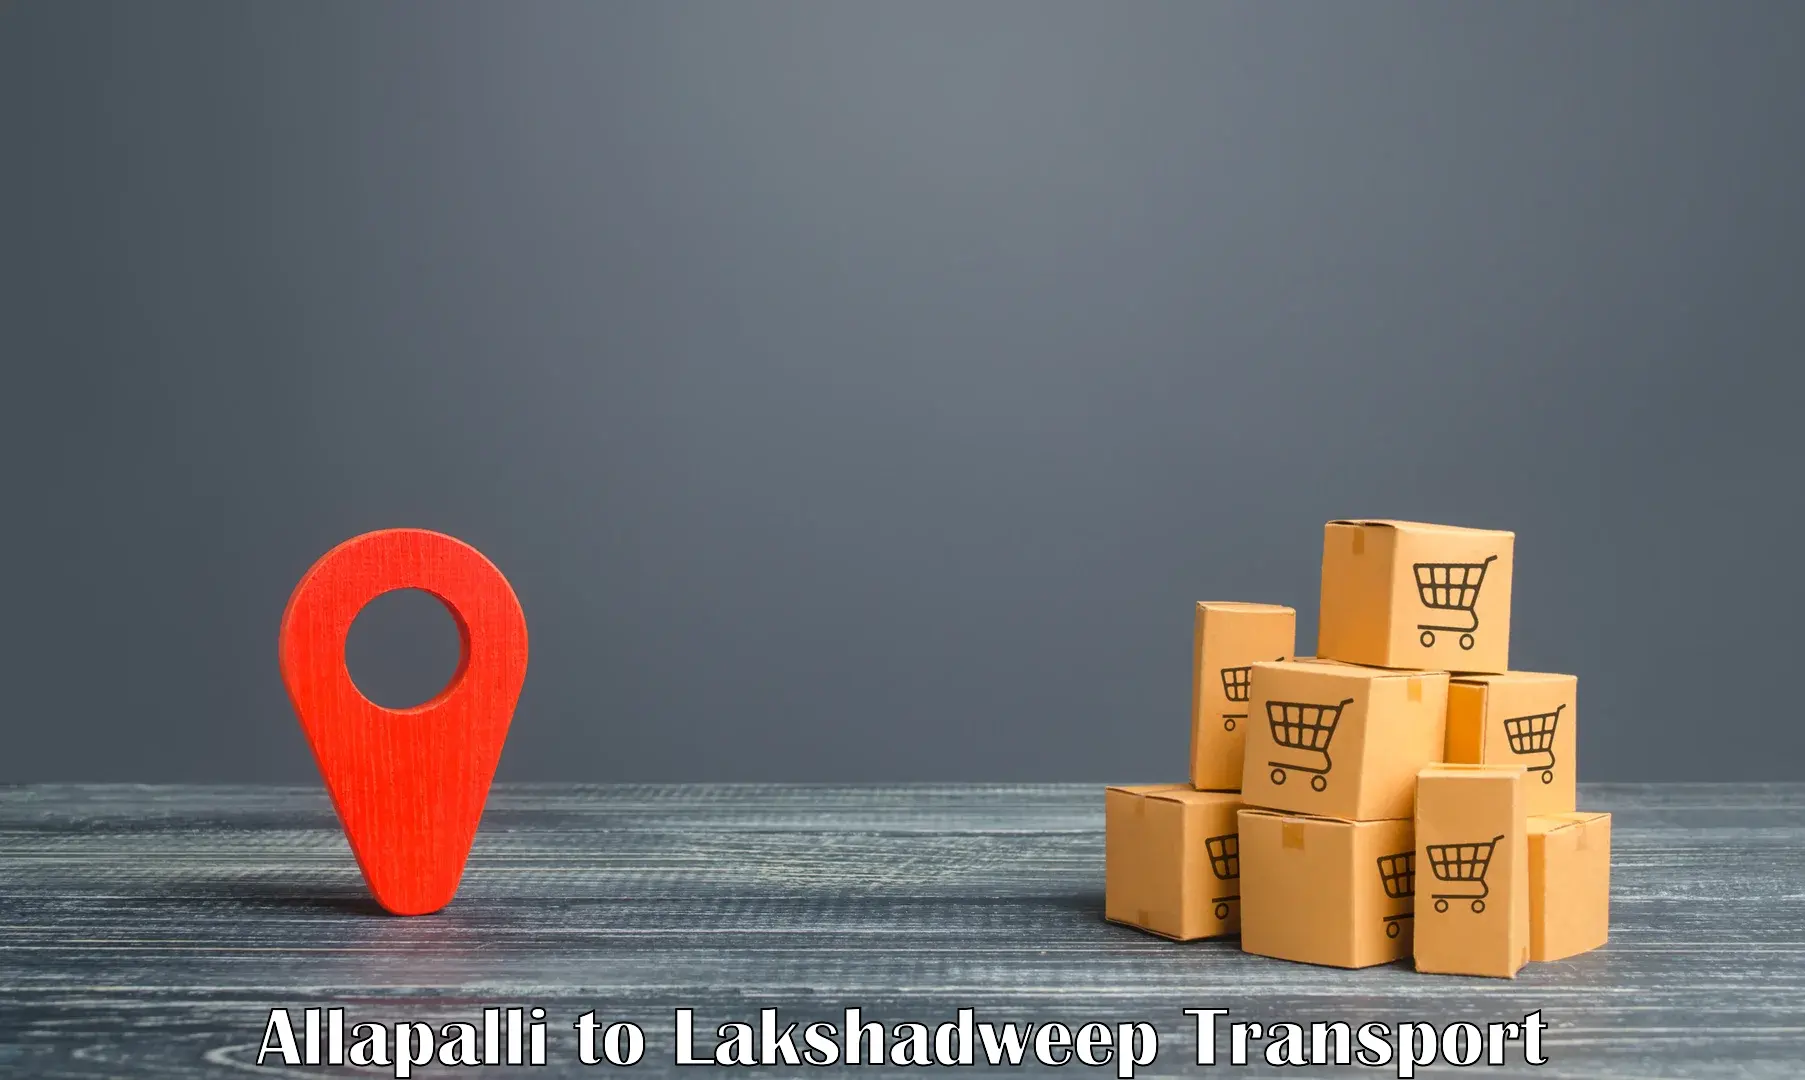 Container transport service Allapalli to Lakshadweep